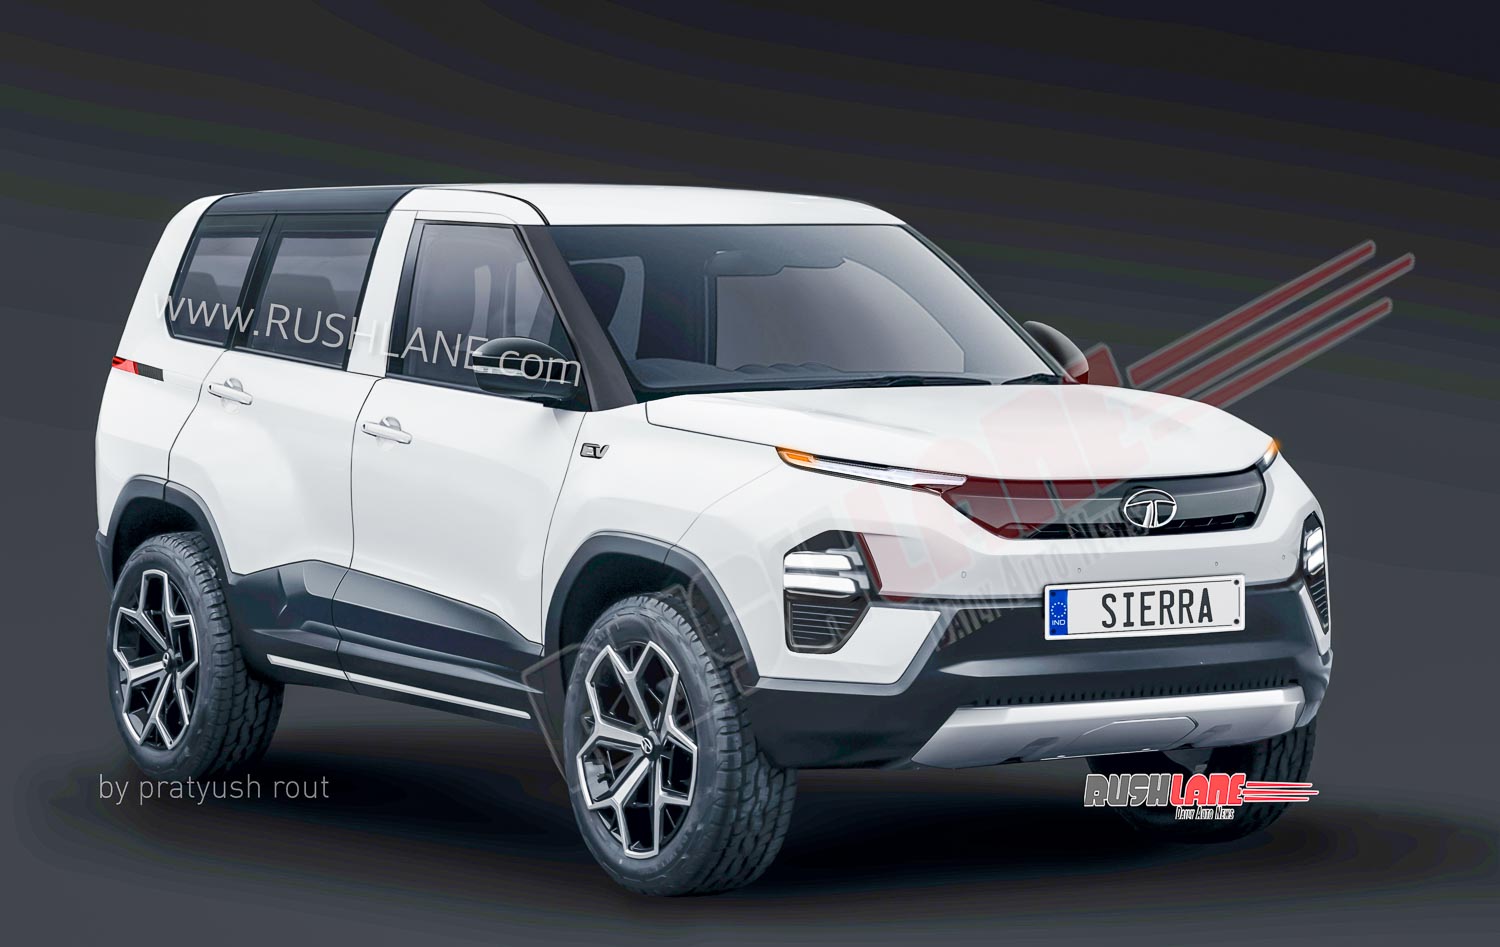 Tata Sierra Suv In 4 New Colours Digital Render Of Production